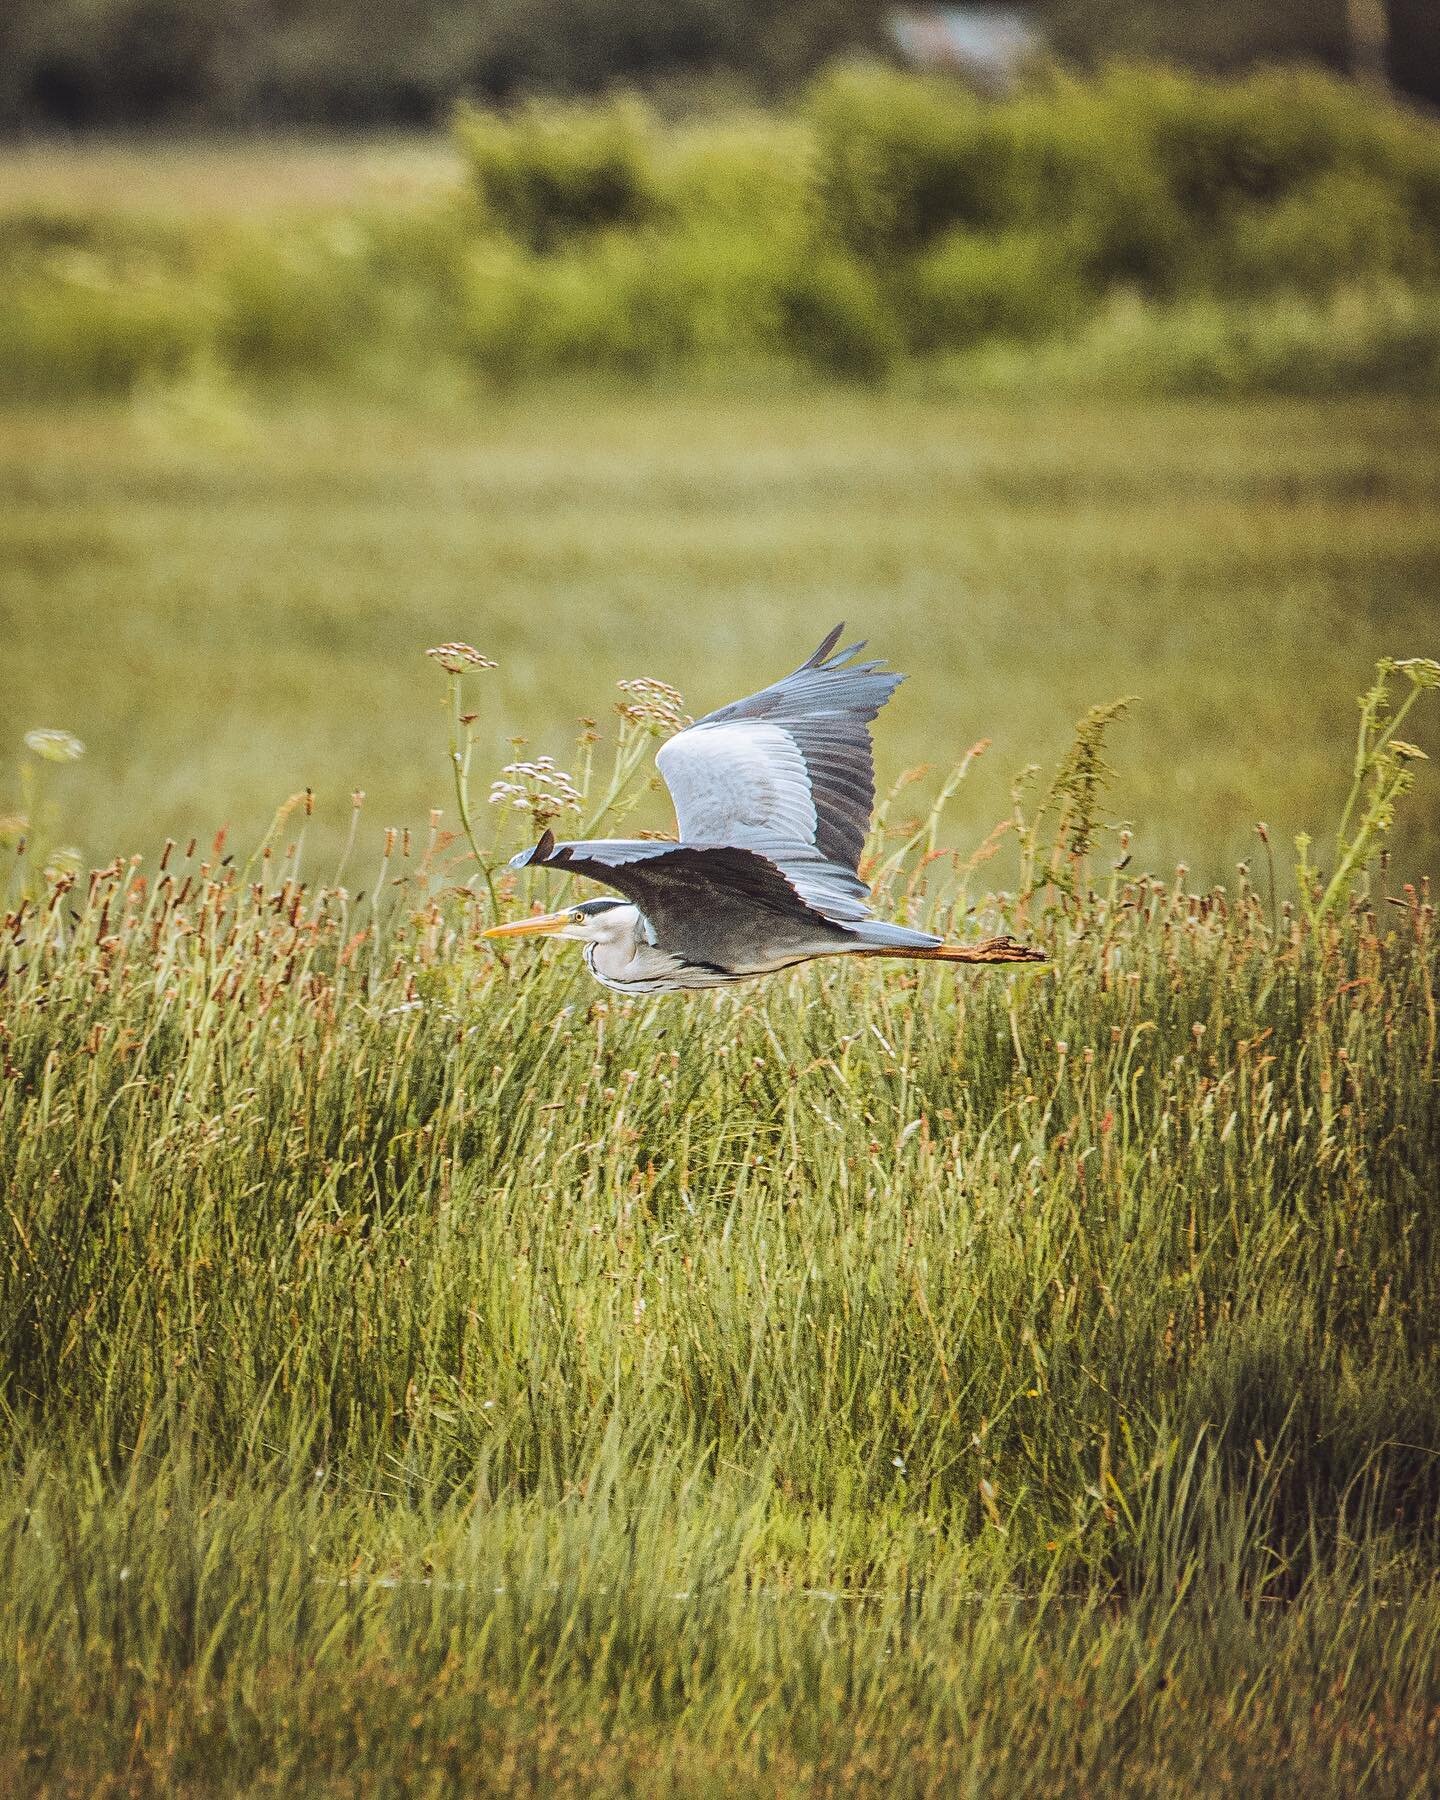 Having seen a heron in the garden last night, reminded me of the last time I saw one, on Islay! I&rsquo;m so excited and looking forward to being able to explore again!
&bull;
&bull;
&bull;
&bull;
&bull;
#birdwatching #birdphotography #birding #birds